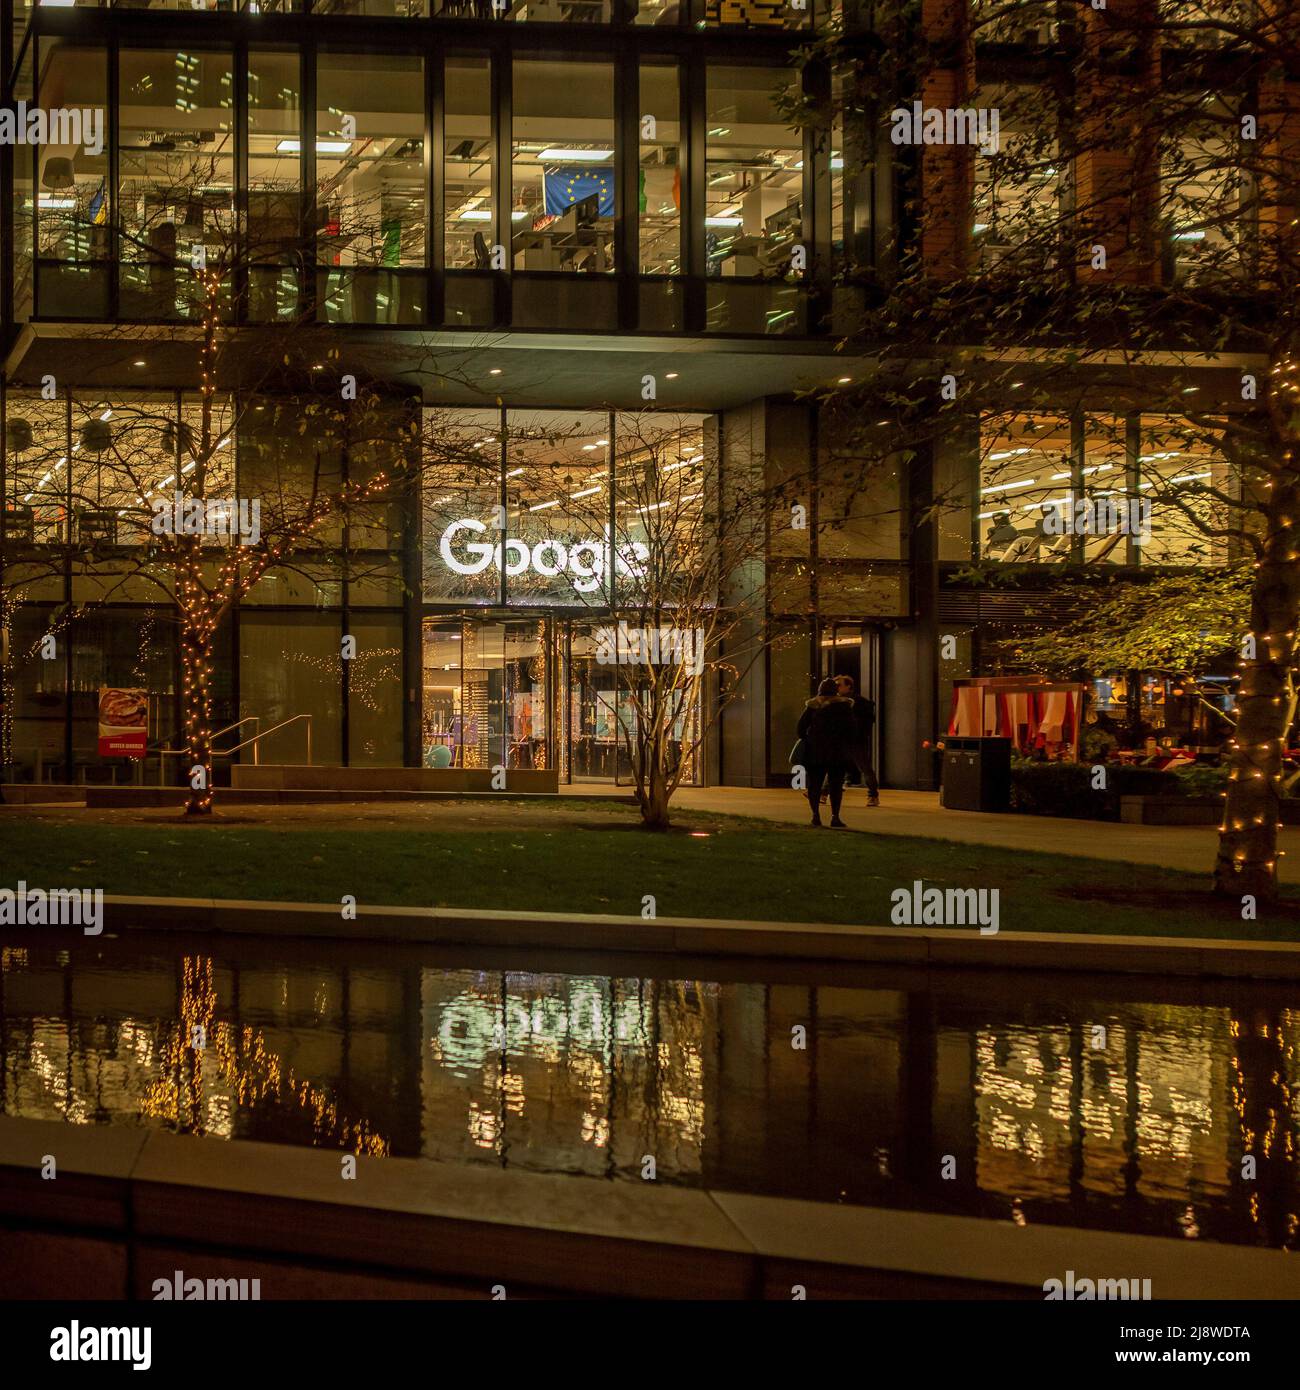 Google offices at night with Chirstmas decorations, Pancras Square, London, UK. Stock Photo